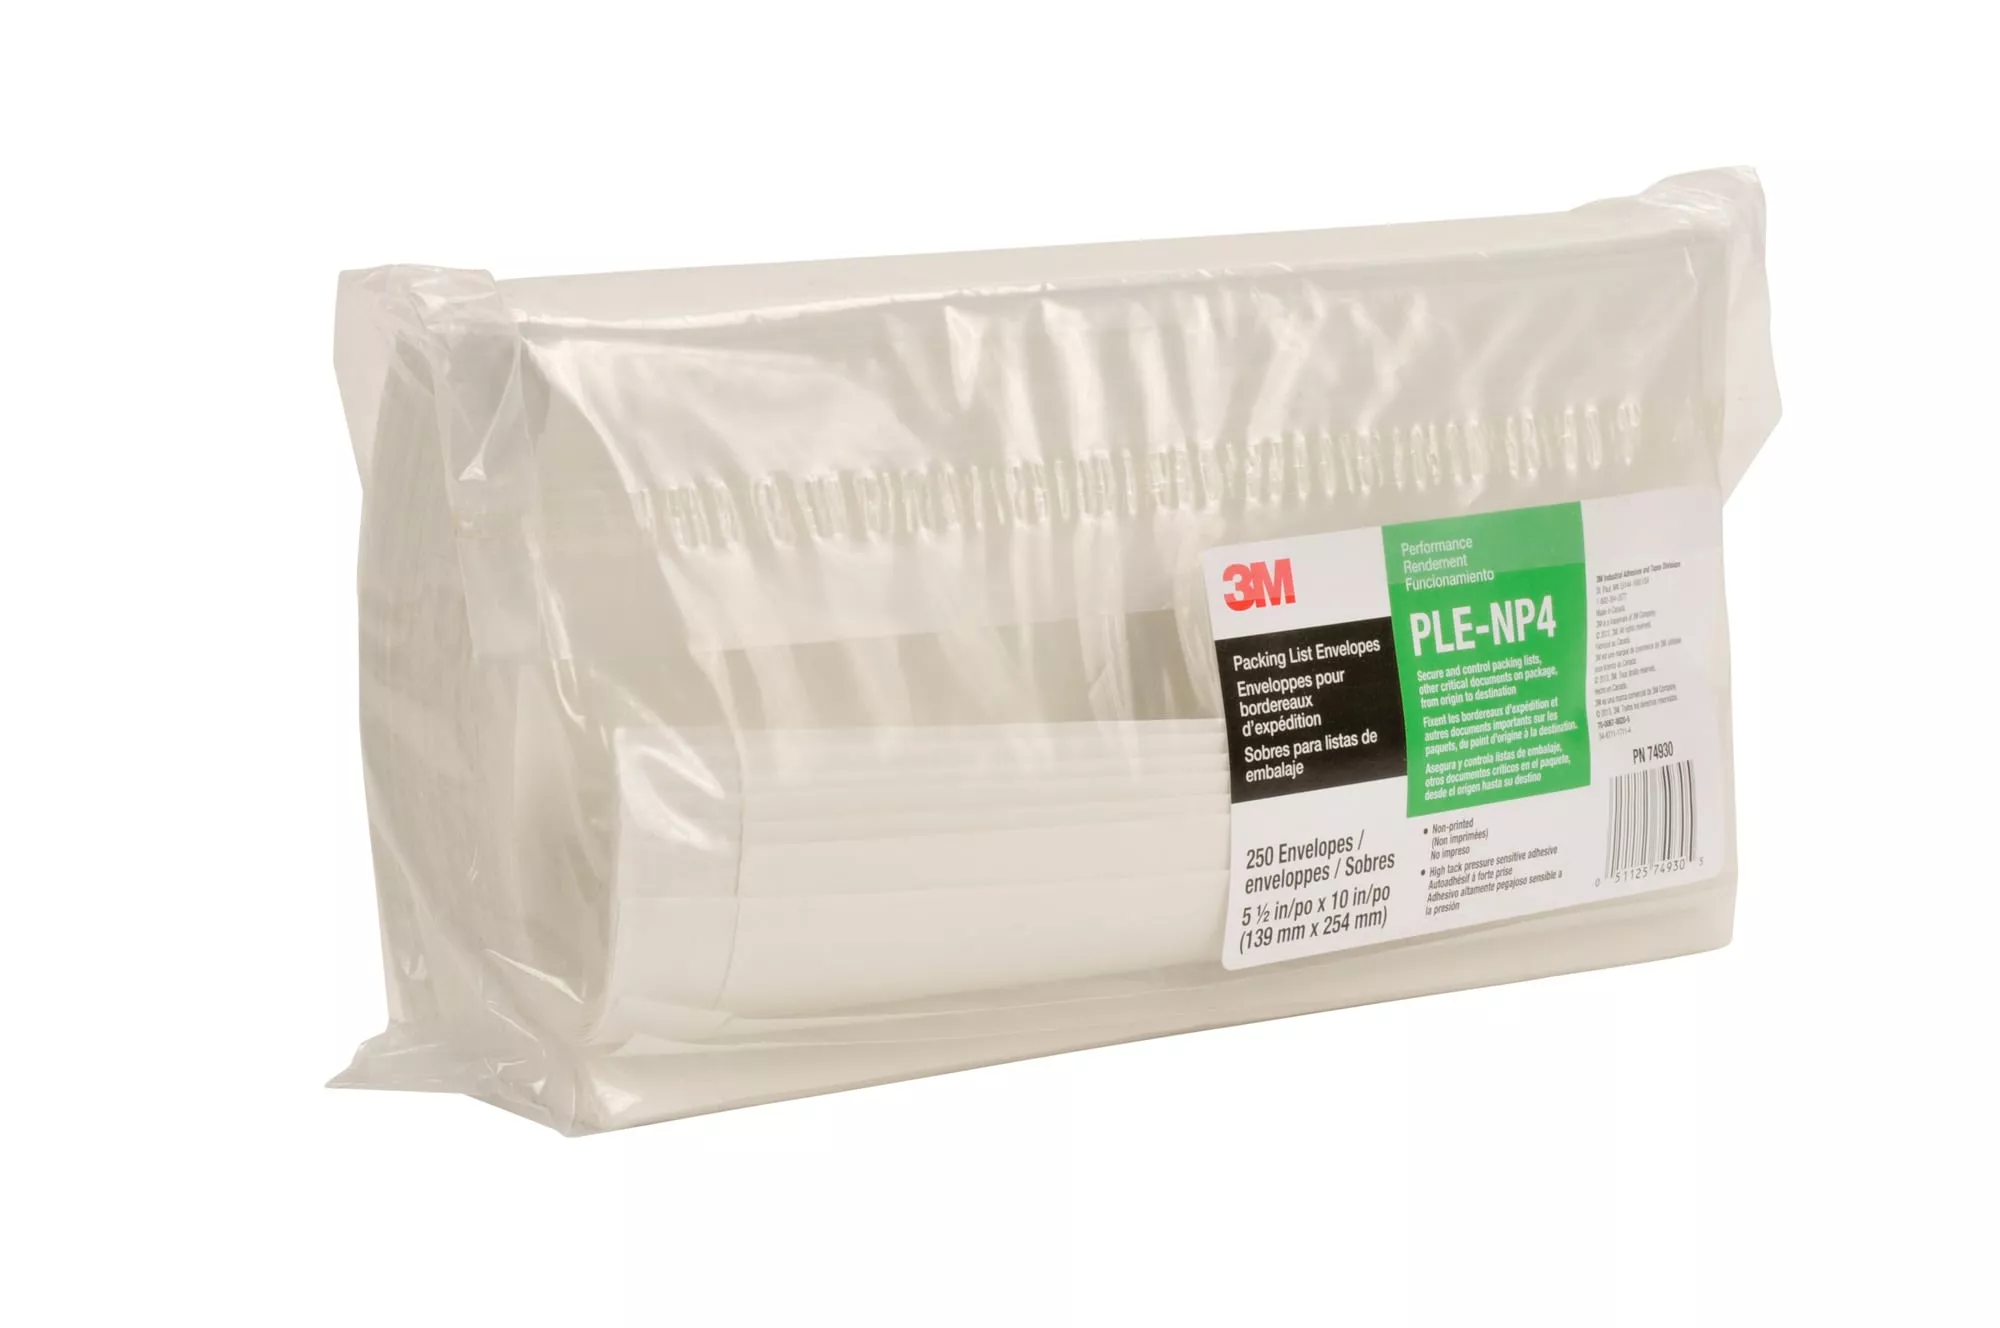 Product Number NP4 | 3M™ Non-Printed Packing List Envelope NP4